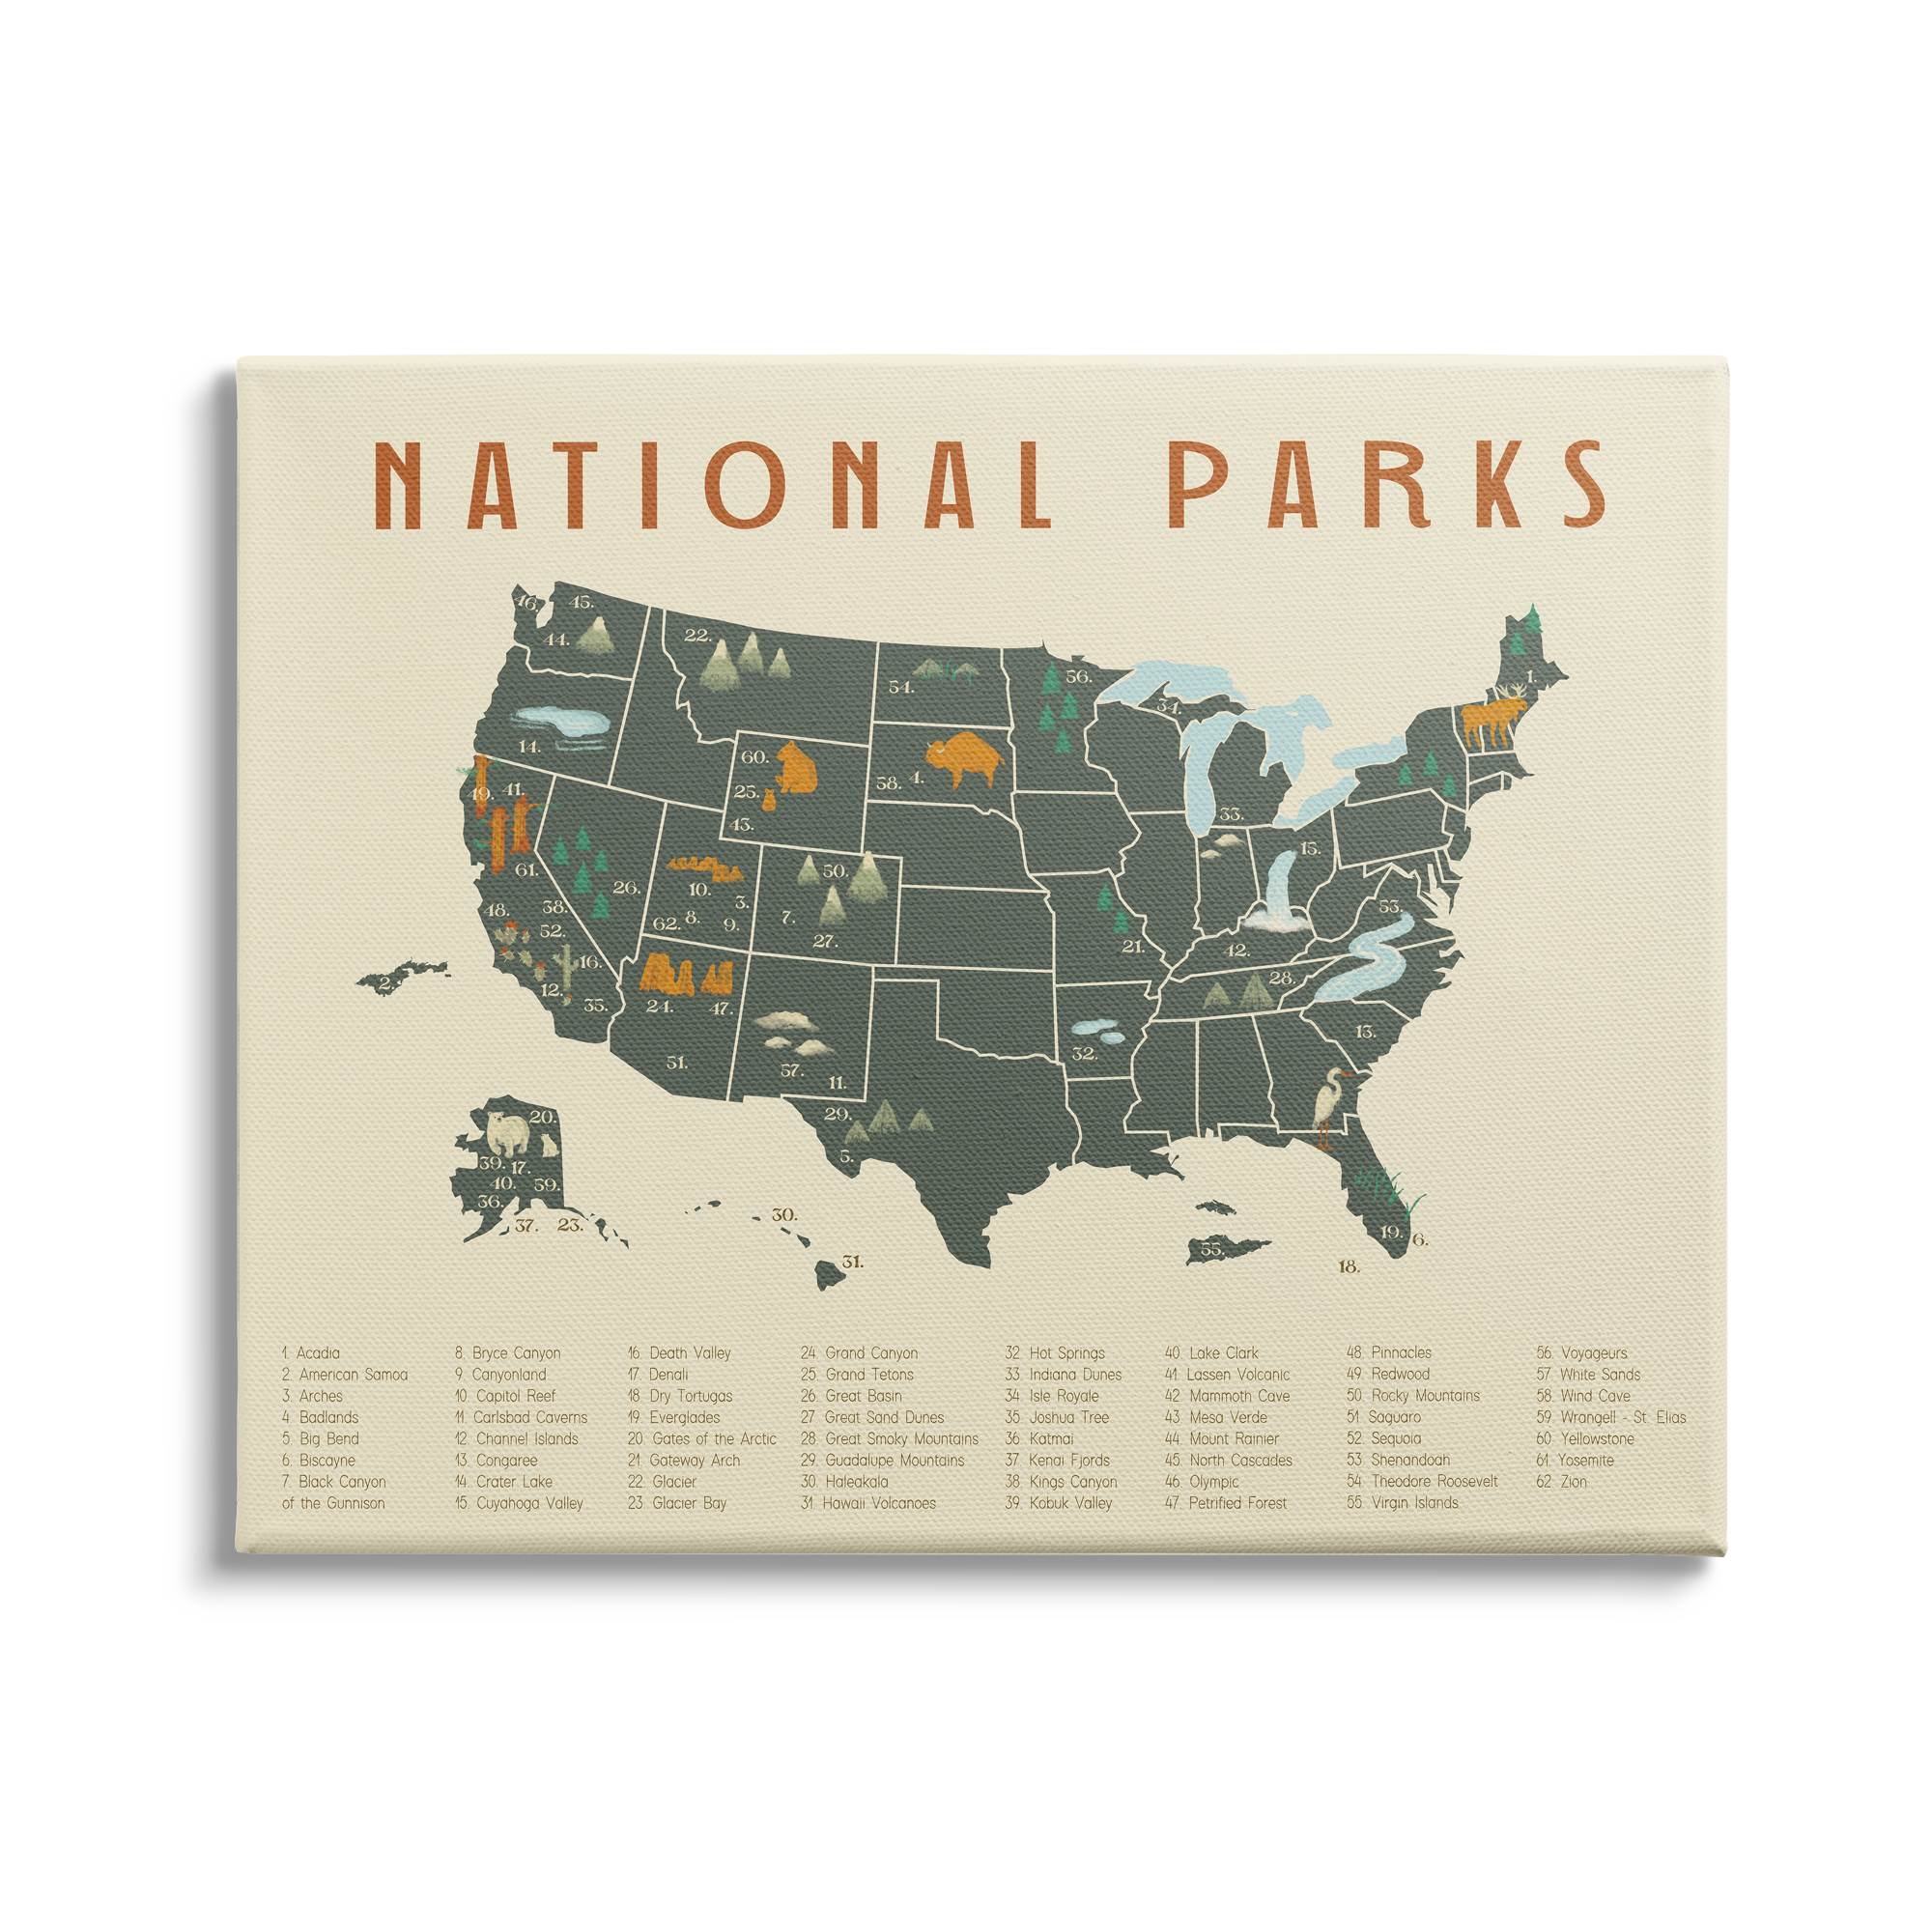 Adventure　x　Daphne　Map　40　by　Parks　Design　National　United　Polselli　Orange,　Green　States　Industries　Stupell　30,